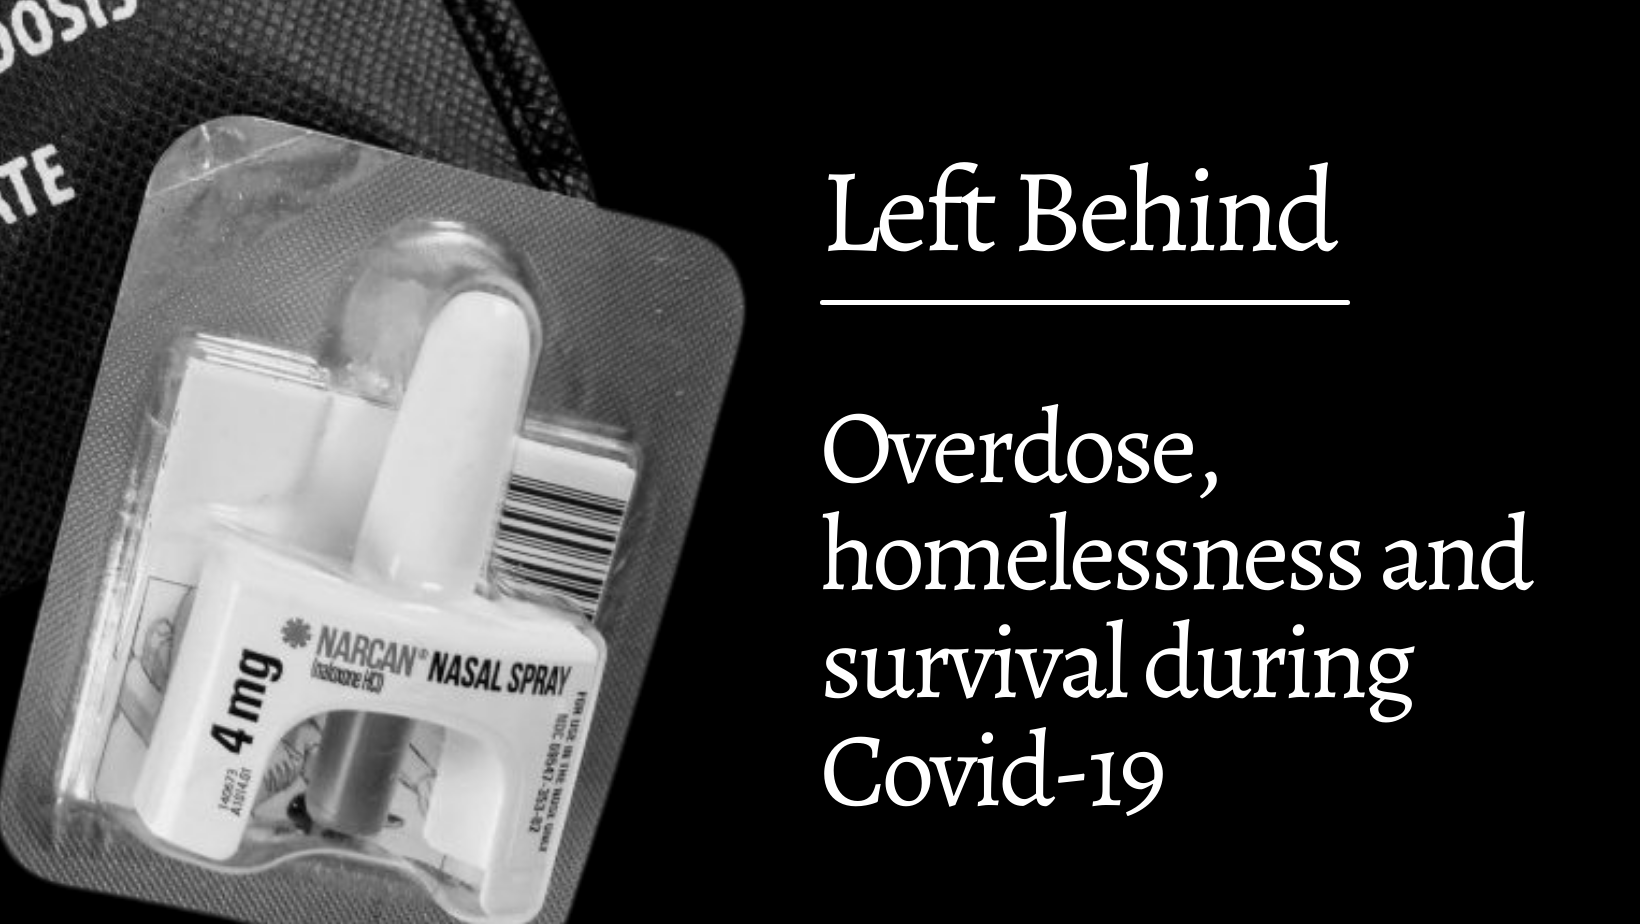 Text says - Left behind: Overdose, homelessness and survival during covid 19, with nasal Narcan spray on the left